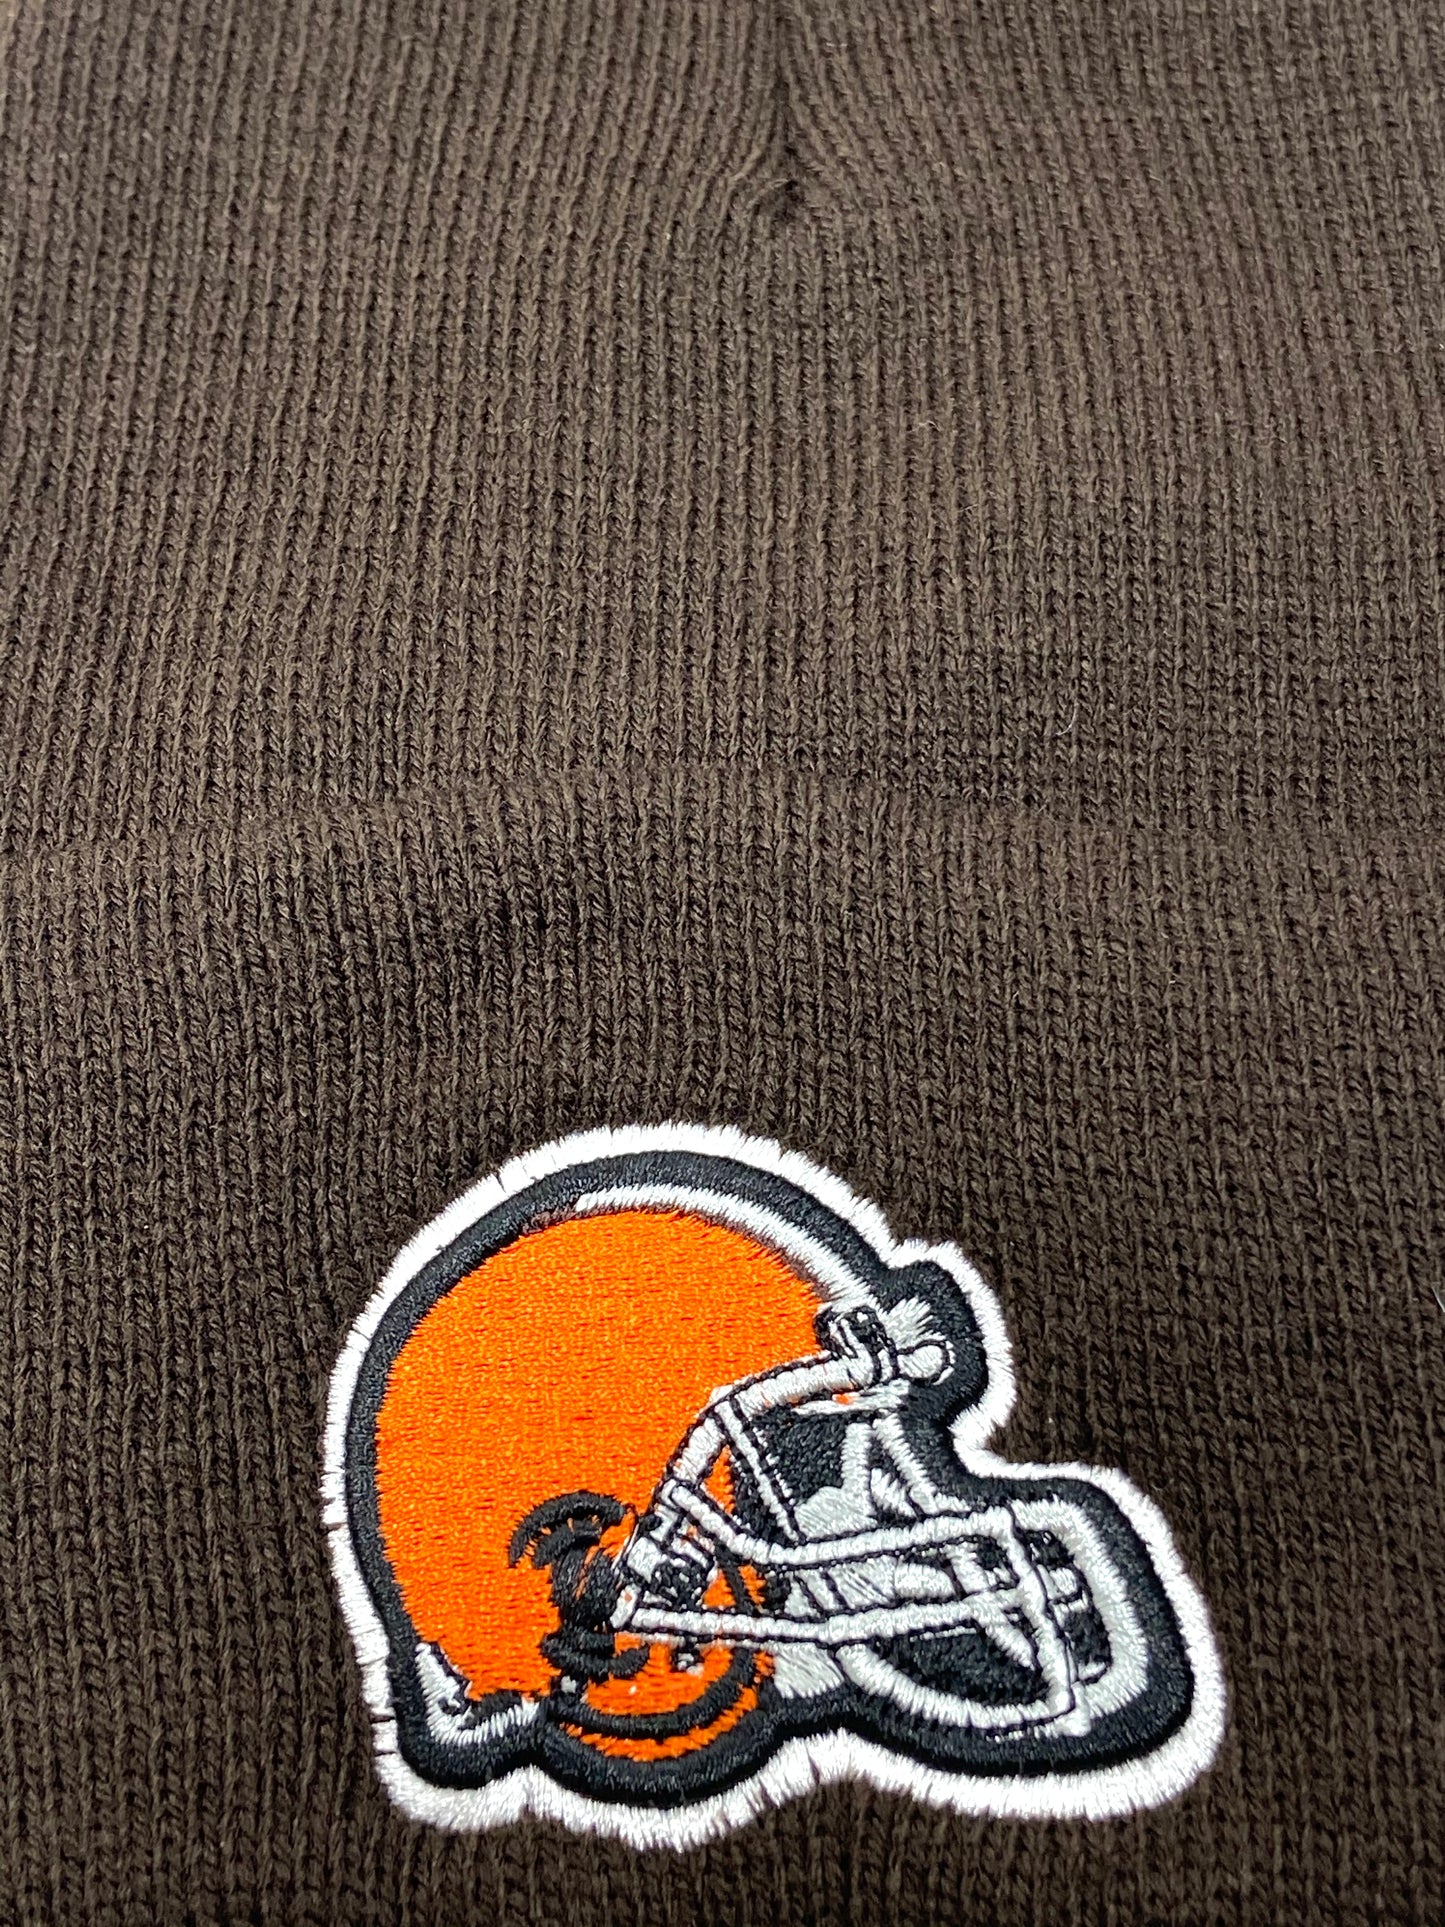 Cleveland Browns Vintage NFL Brown Cuffed Knit Logo Hat by NFL